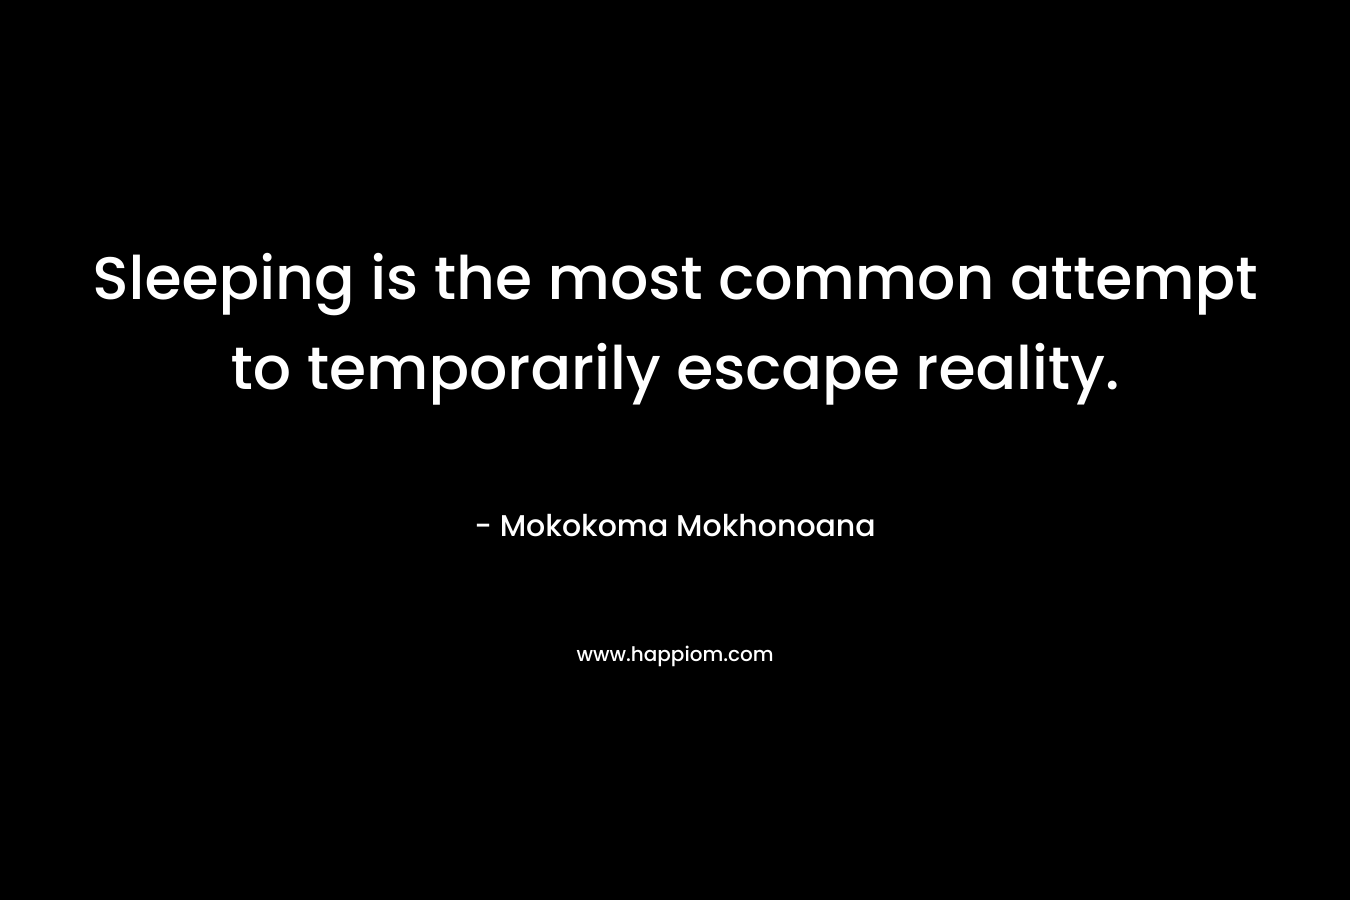 Sleeping is the most common attempt to temporarily escape reality.